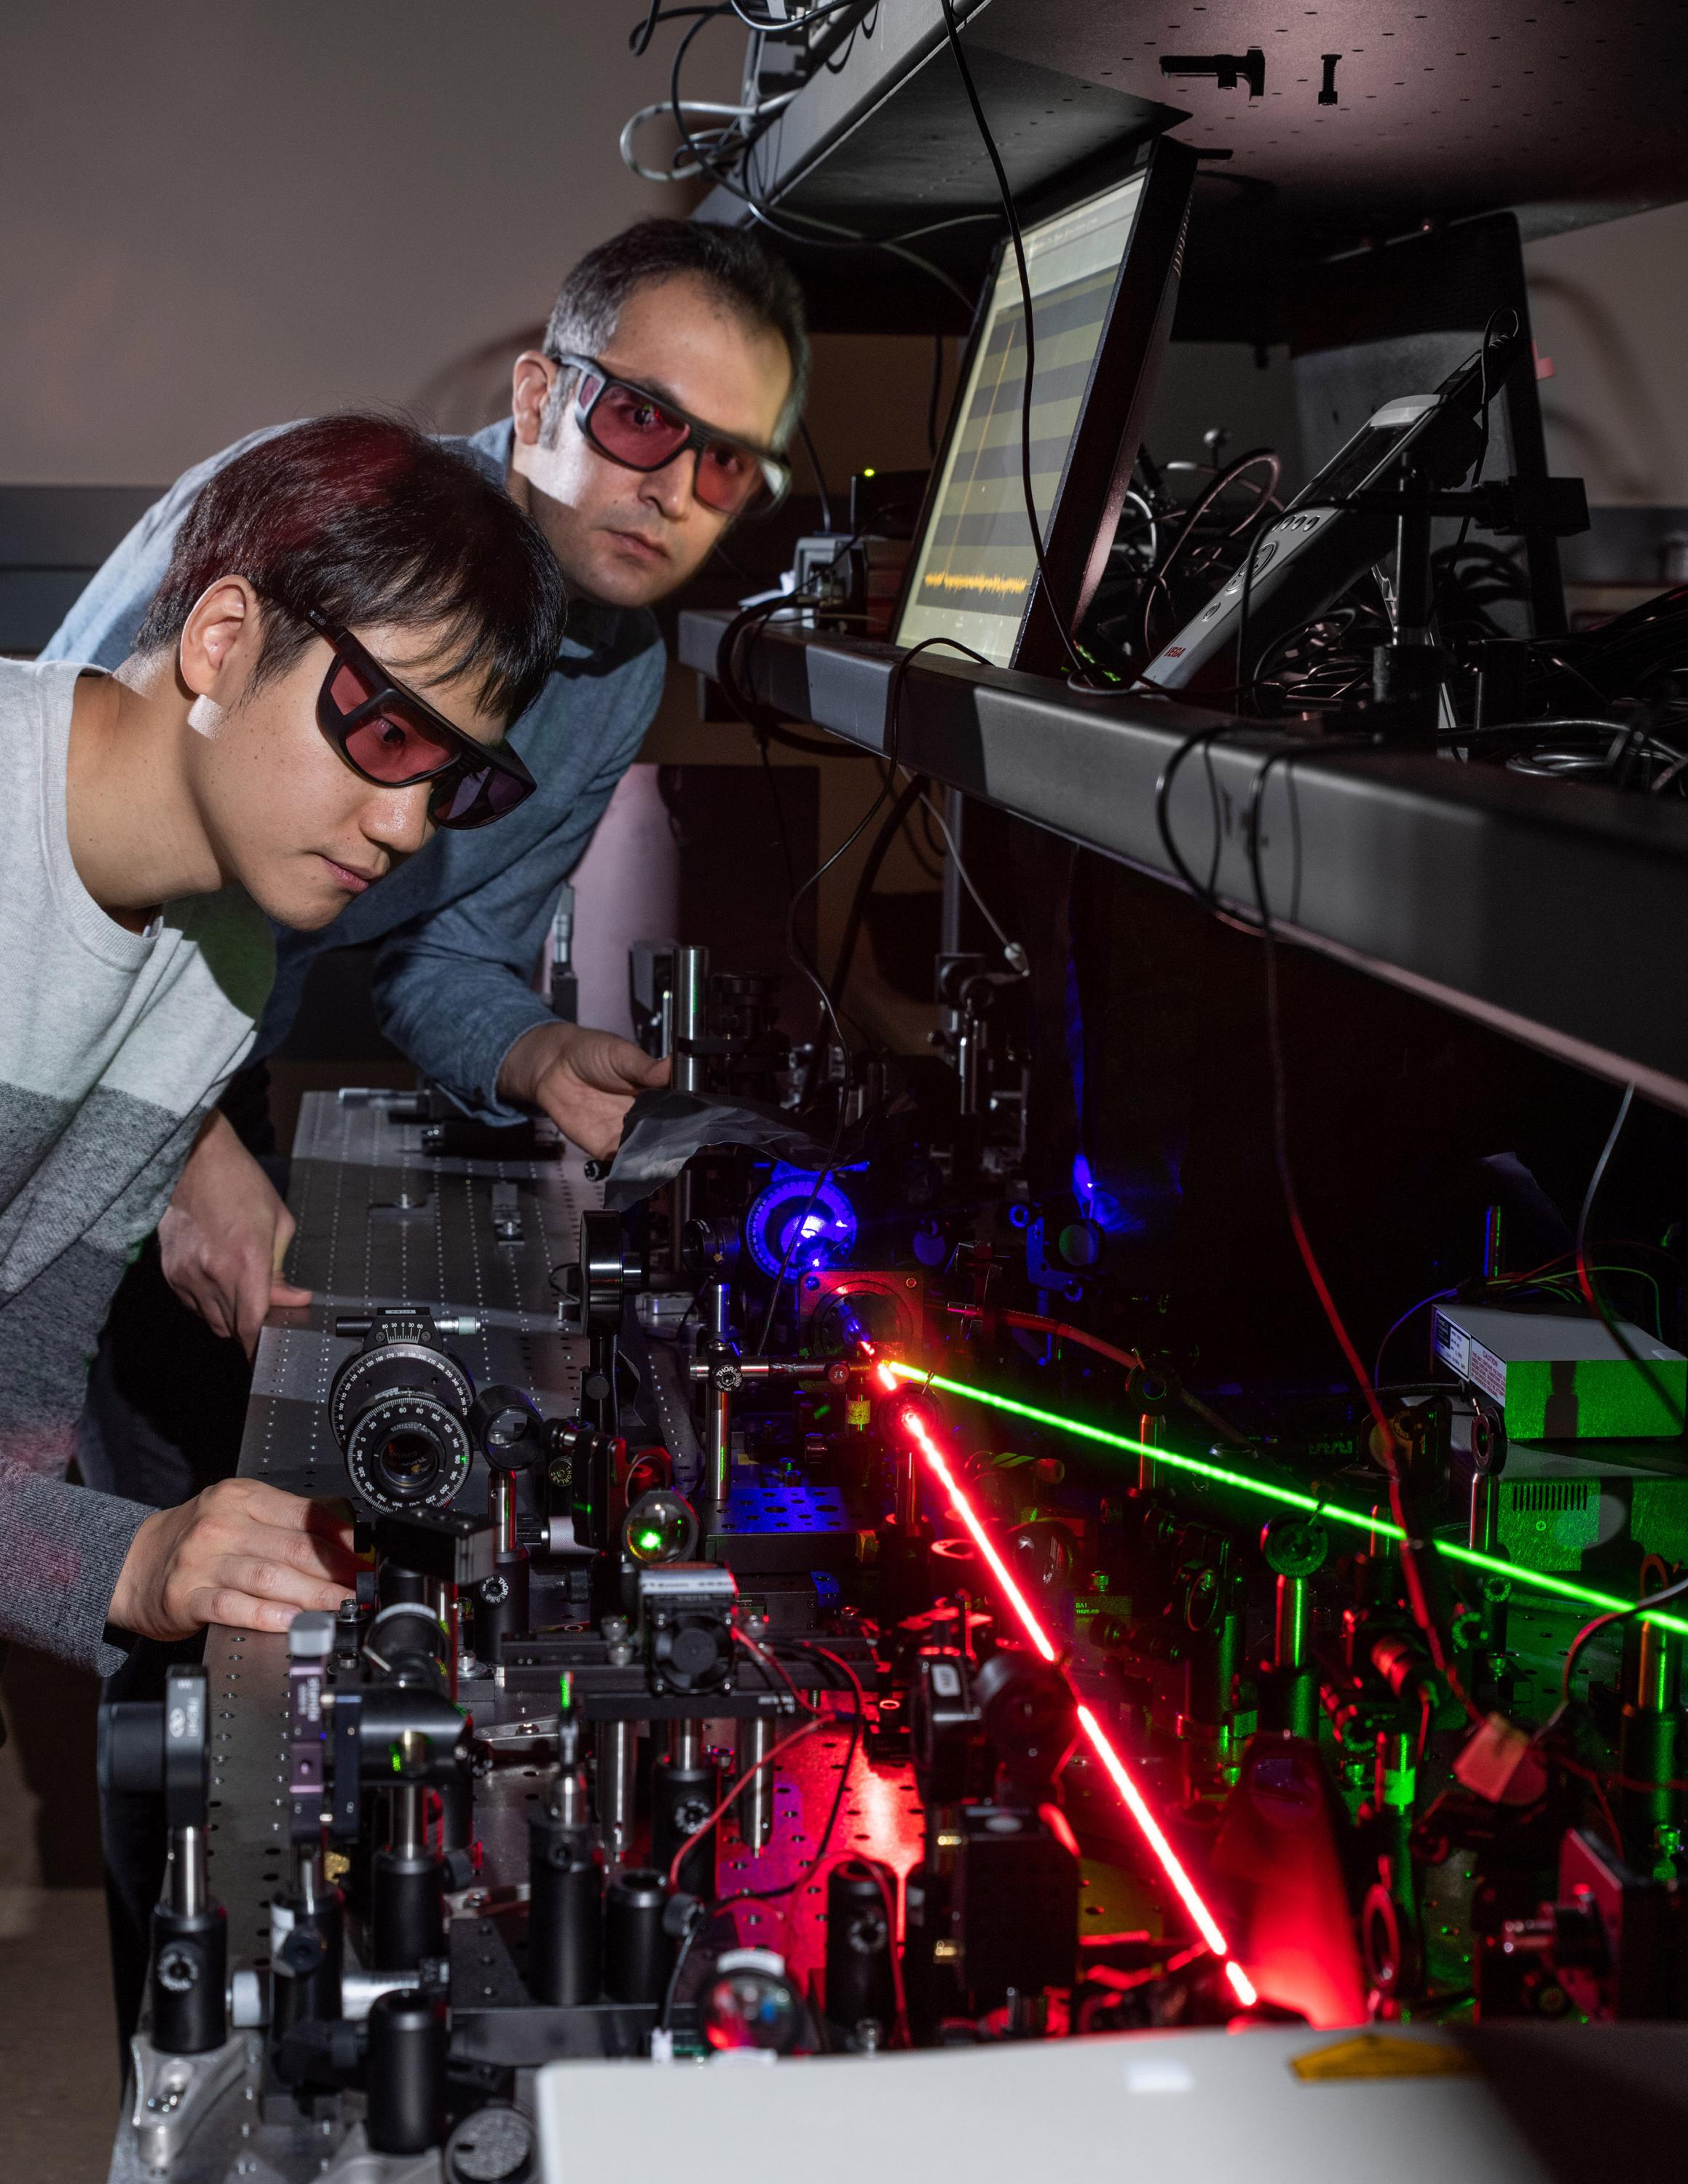 Georgia Tech researchers Kyu-Tae Lee and Mohammad Taghinejad demonstrate frequency doubling on a slab of titanium dioxide using a red laser to create nonlinear effects with tiny triangles of gold. The blue beam shows the frequency-doubled light and the green beam controls the hot-electron migration. (Credit: Rob Felt, Georgia Tech)